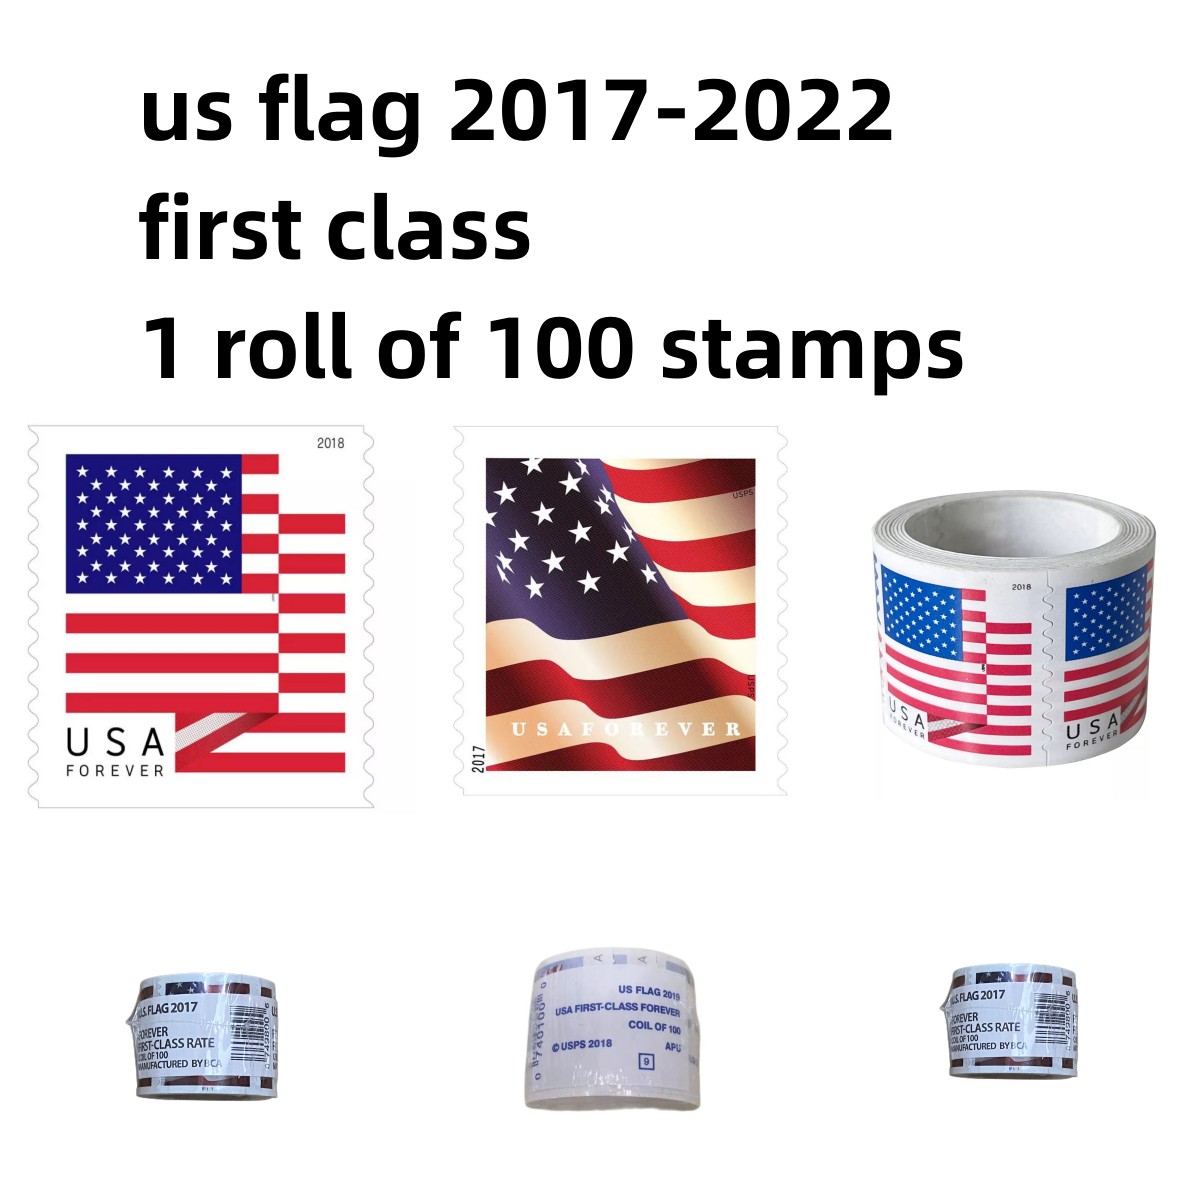 2022 sticker US Flag USA Postal Stamp First Class Mail For US Post Office Service Roll Coil of 100 Wedding Celebration Invitations Anniversary Birthdays